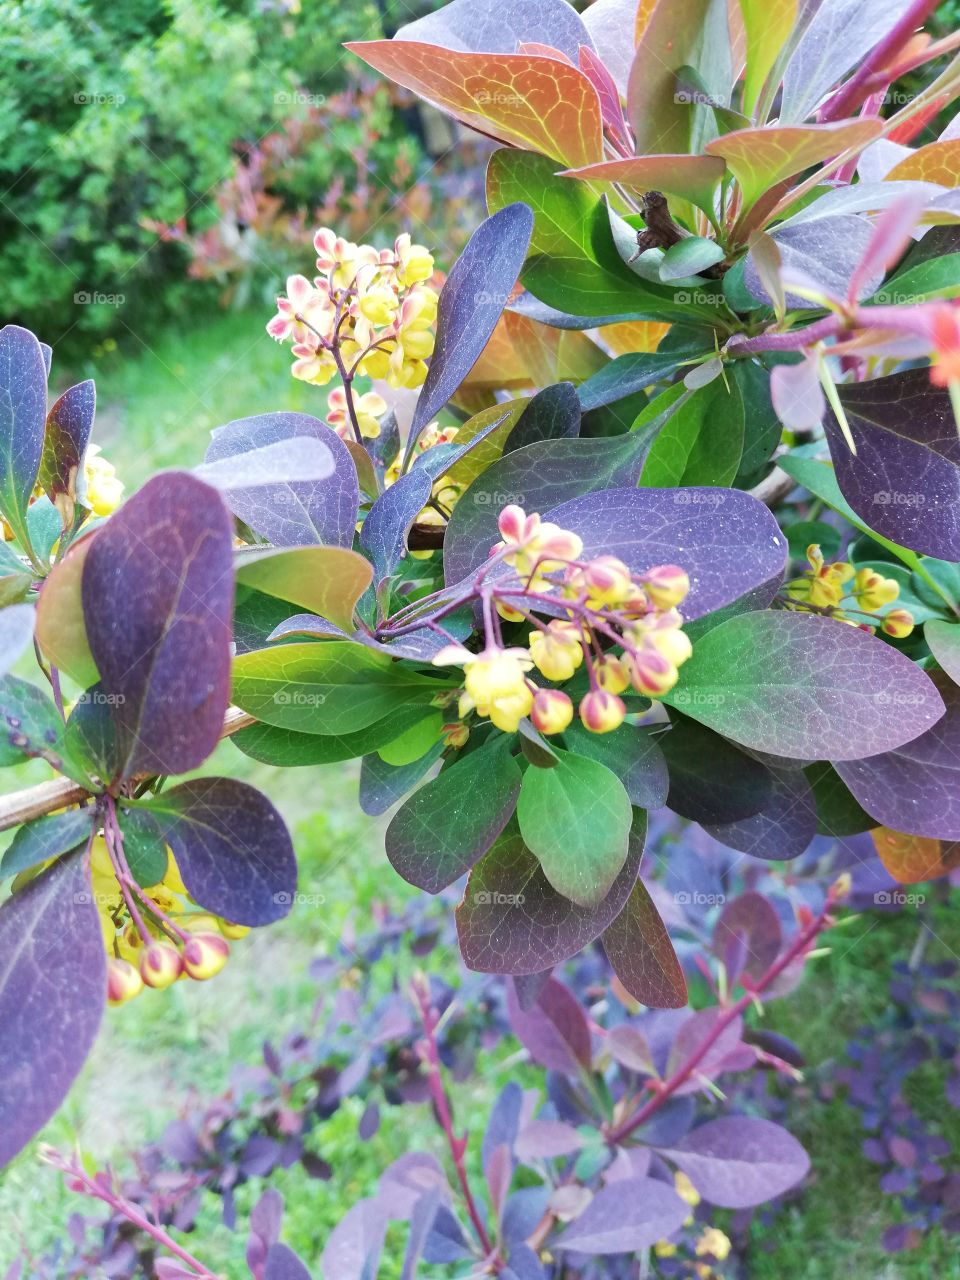 In the front of the garden a barberry shrub is blooming in yellow and violet colors on a sunny day. The petioles are visible. In the background are more plants.